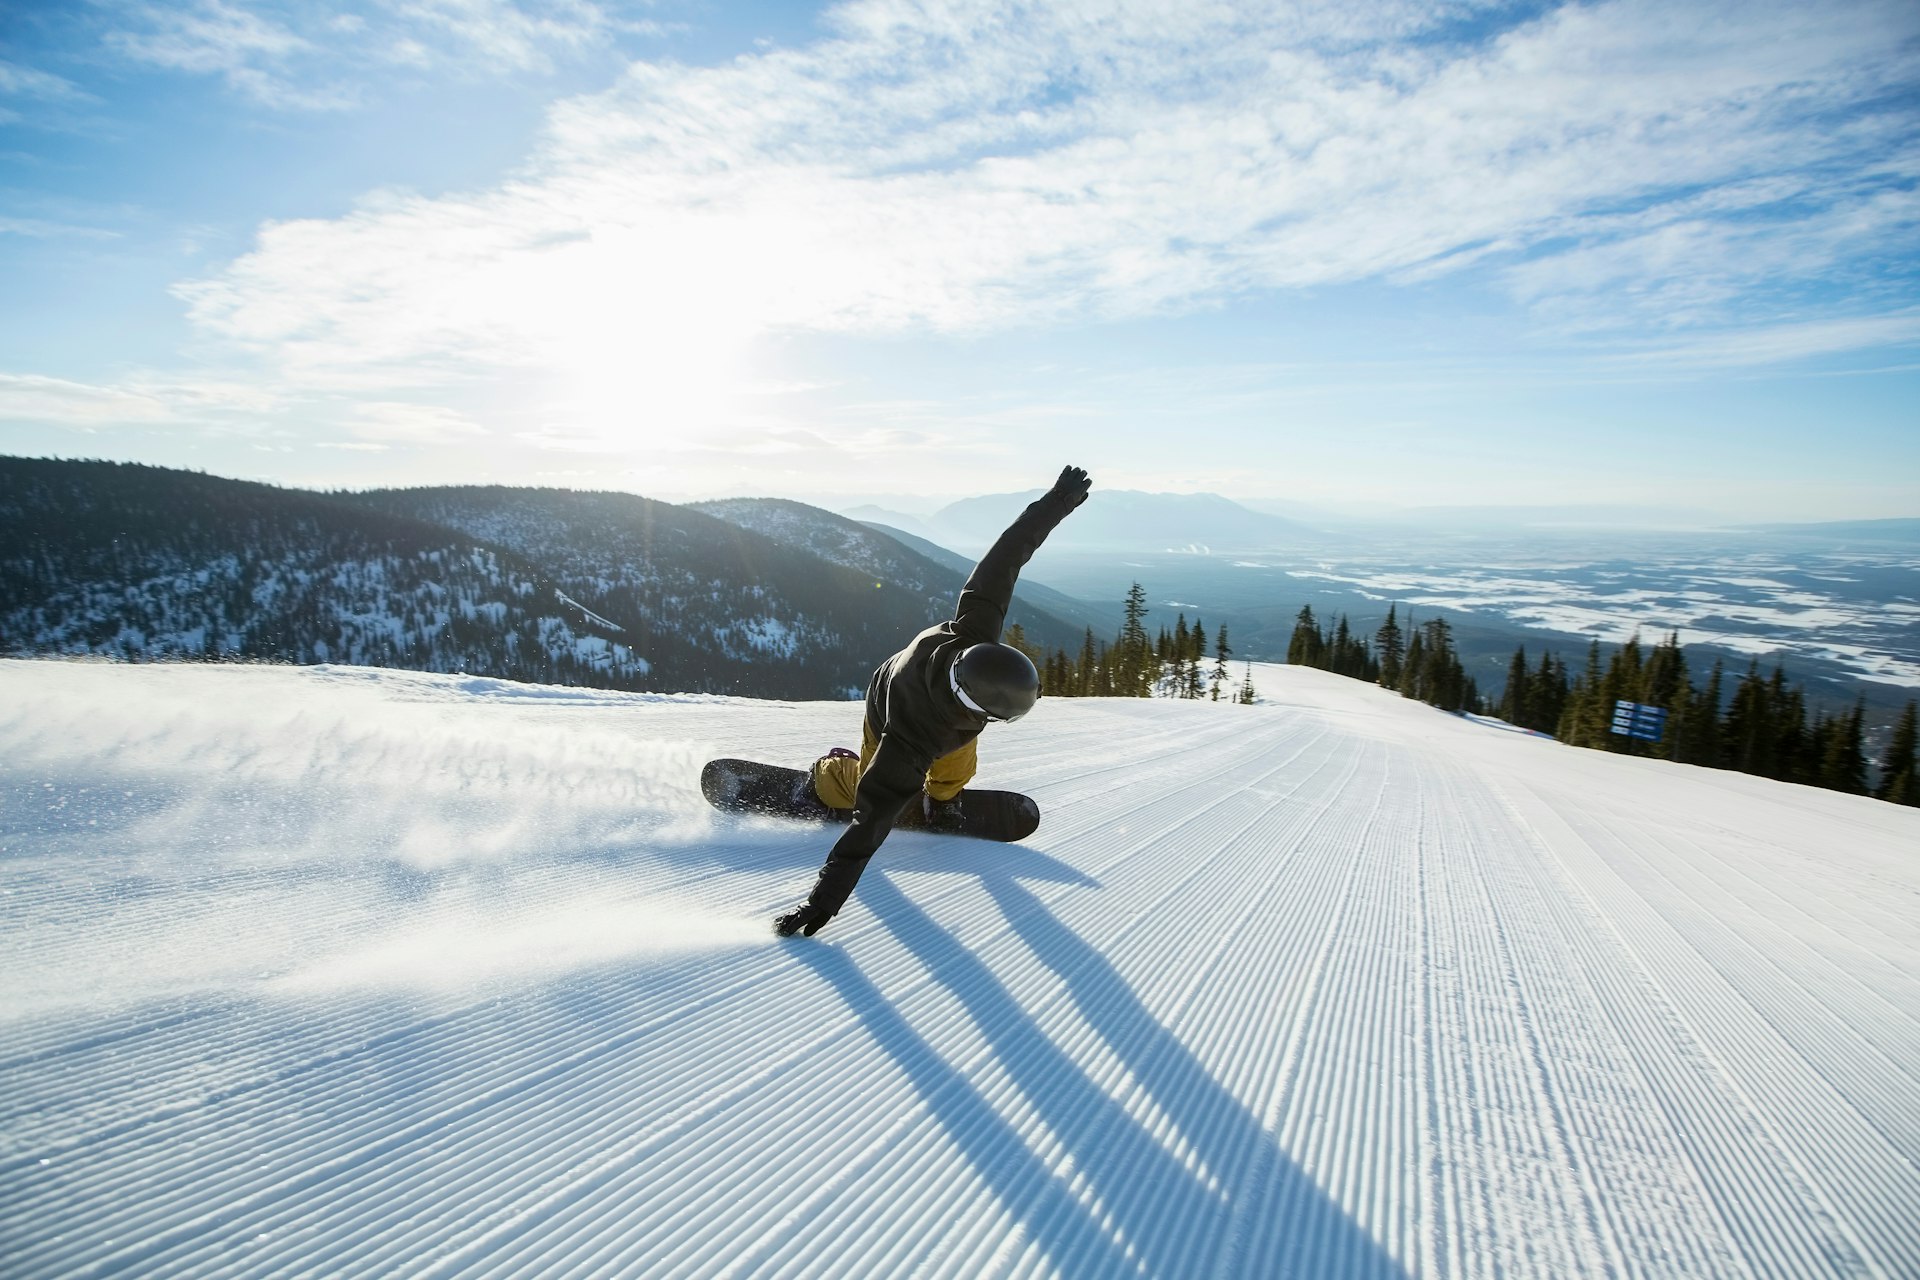 A snowboarder riding on a slope in Montana